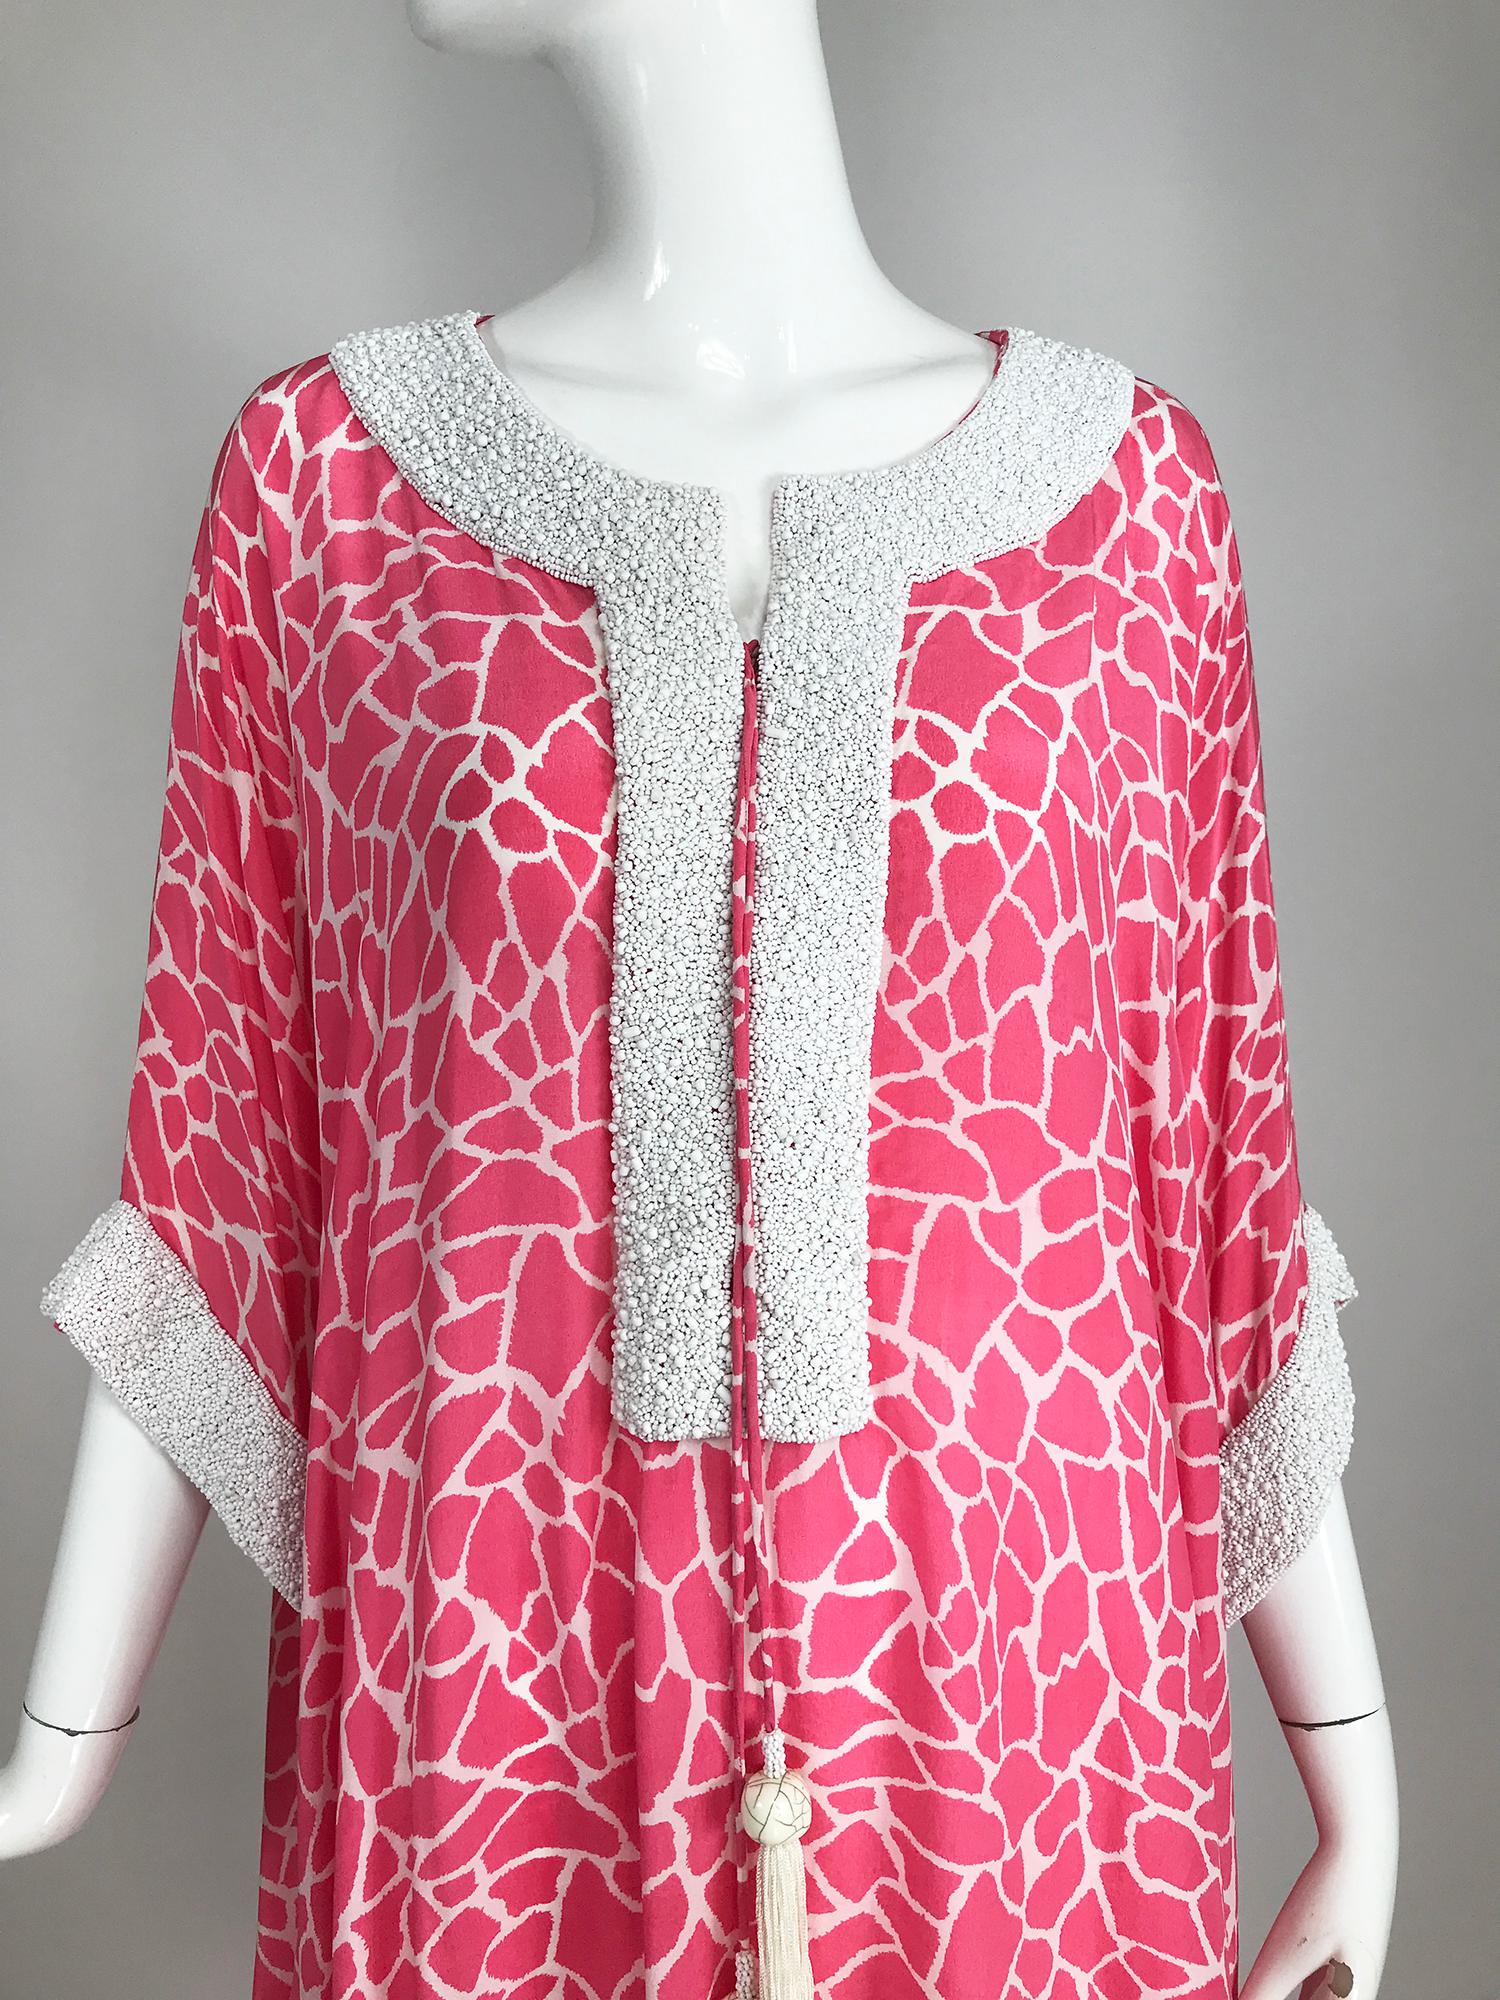 Jeannie McQueeny pink and white silk, heavily beaded caftan, hidden laced front with bead tassel cords. This beautiful caftan is perfect for entertaining at home. Pink and white silk print gives a nod to the 70s, the neckline and cuffs are heavily